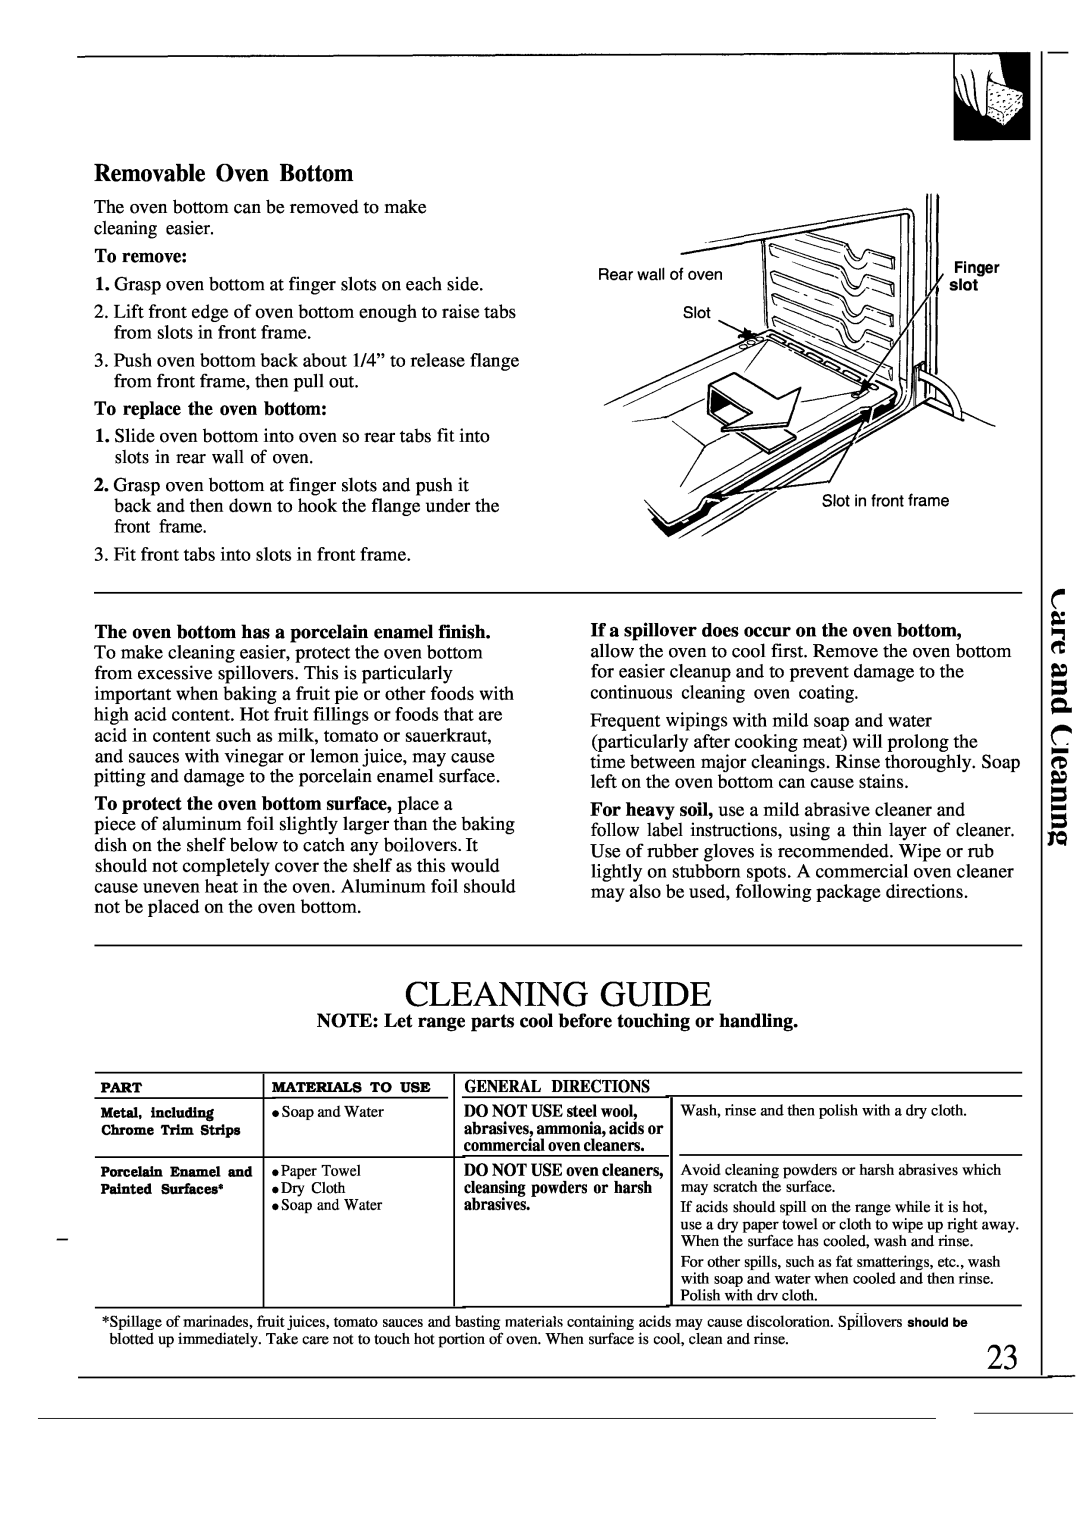 GE 164 D2588P120, MNU109I, JGSC12GER, 49-8319 operating instructions Cleaning Guide, Removable Oven Bottom 